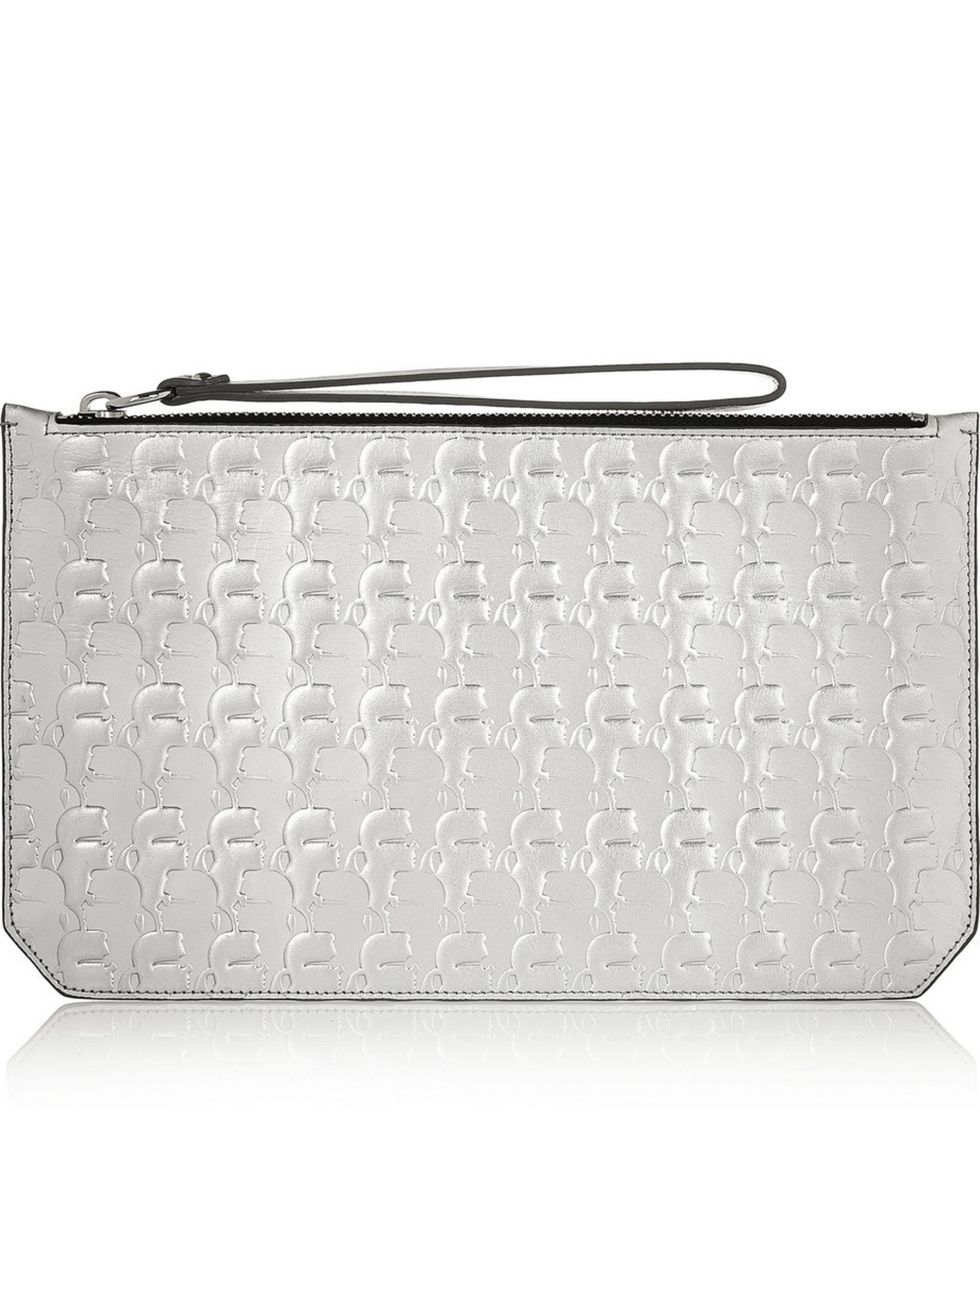 <p>Karl Lagerfeld metallic pouch, £38 at <a href="http://www.theoutnet.com/en-GB/product/Karl-Lagerfeld/Kache-embossed-metallic-leather-pouch/516976">The Outnet</a>.</p>